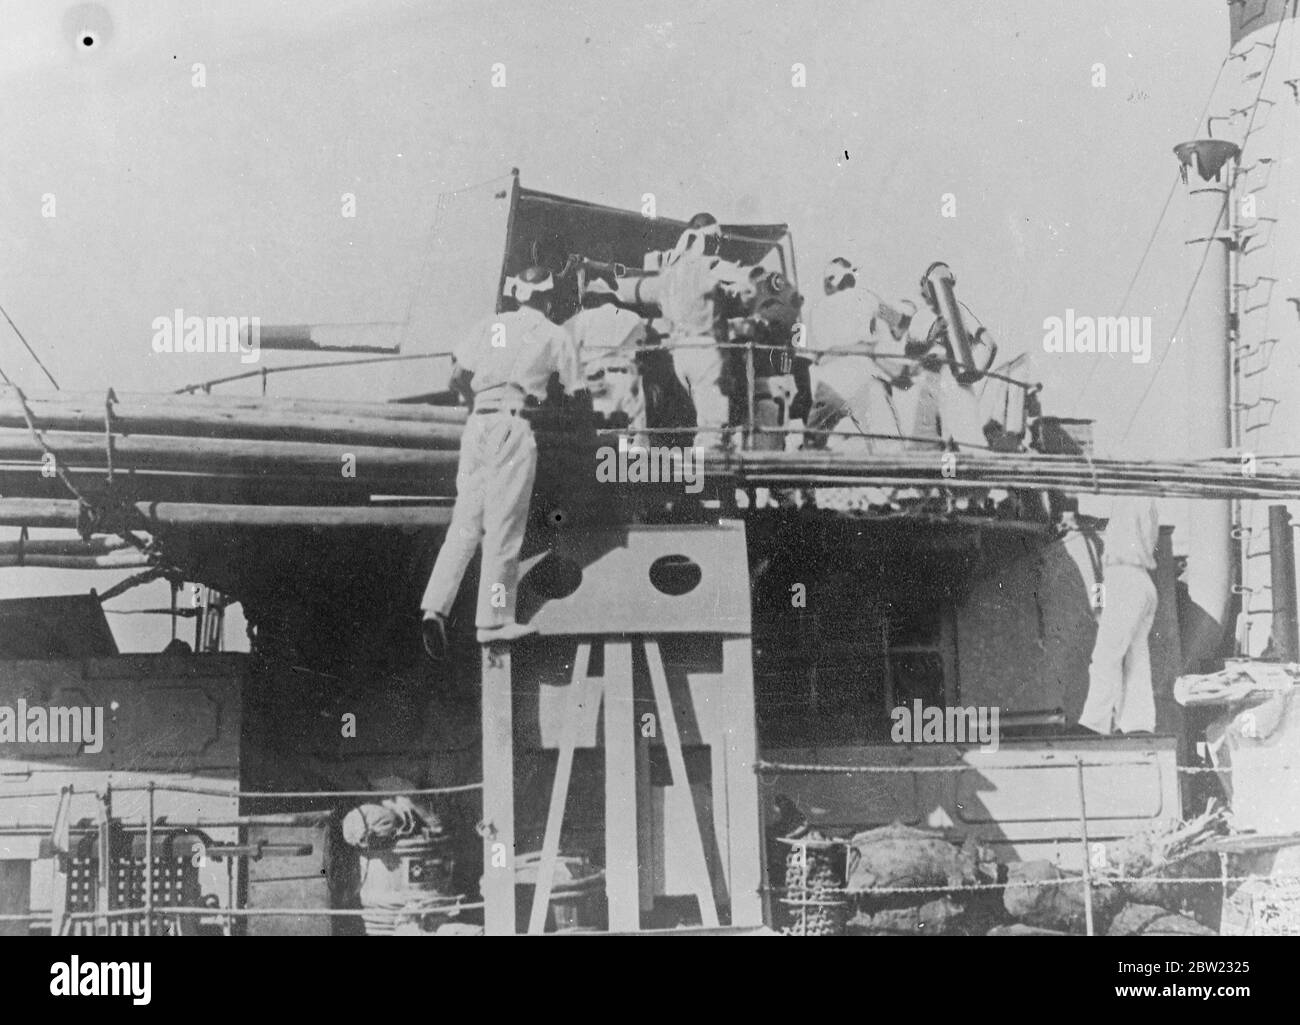 First pictures showing the Japanese Navy in action in the Chinese War. It shows a Japanese destroyer firing on the Chinese forts at Taku at the mouth of the river leading to Tientsing, North China. Sailors are loading one of the worships big guns. 1 September 1937 Stock Photo